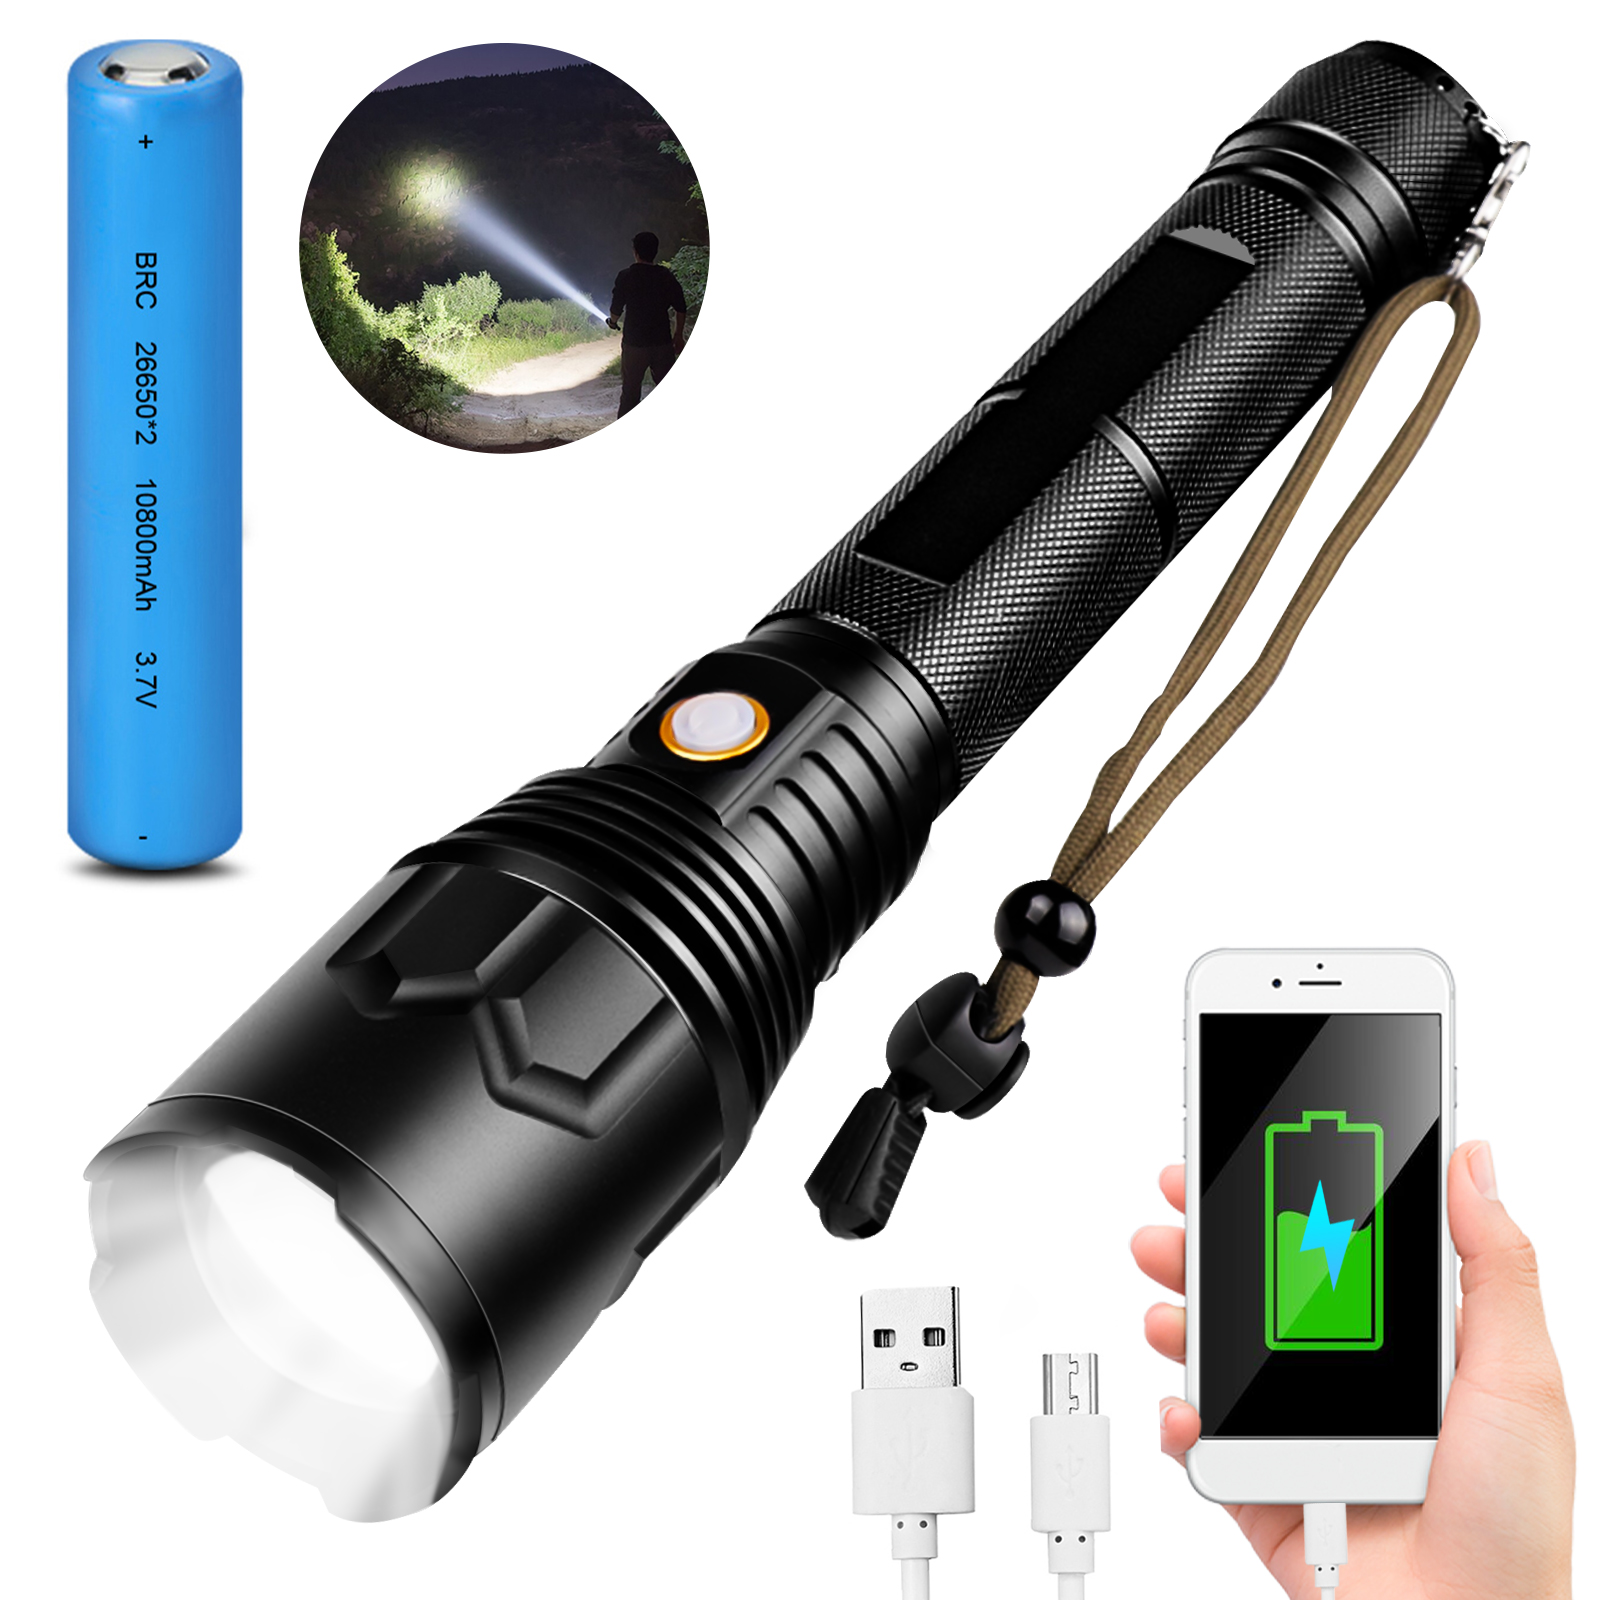 P70-USB-Rechargeable-Flashlight-with-Zoom-and-Output-Rechargeable-Battery-with-Hand-Strap-1890364-1